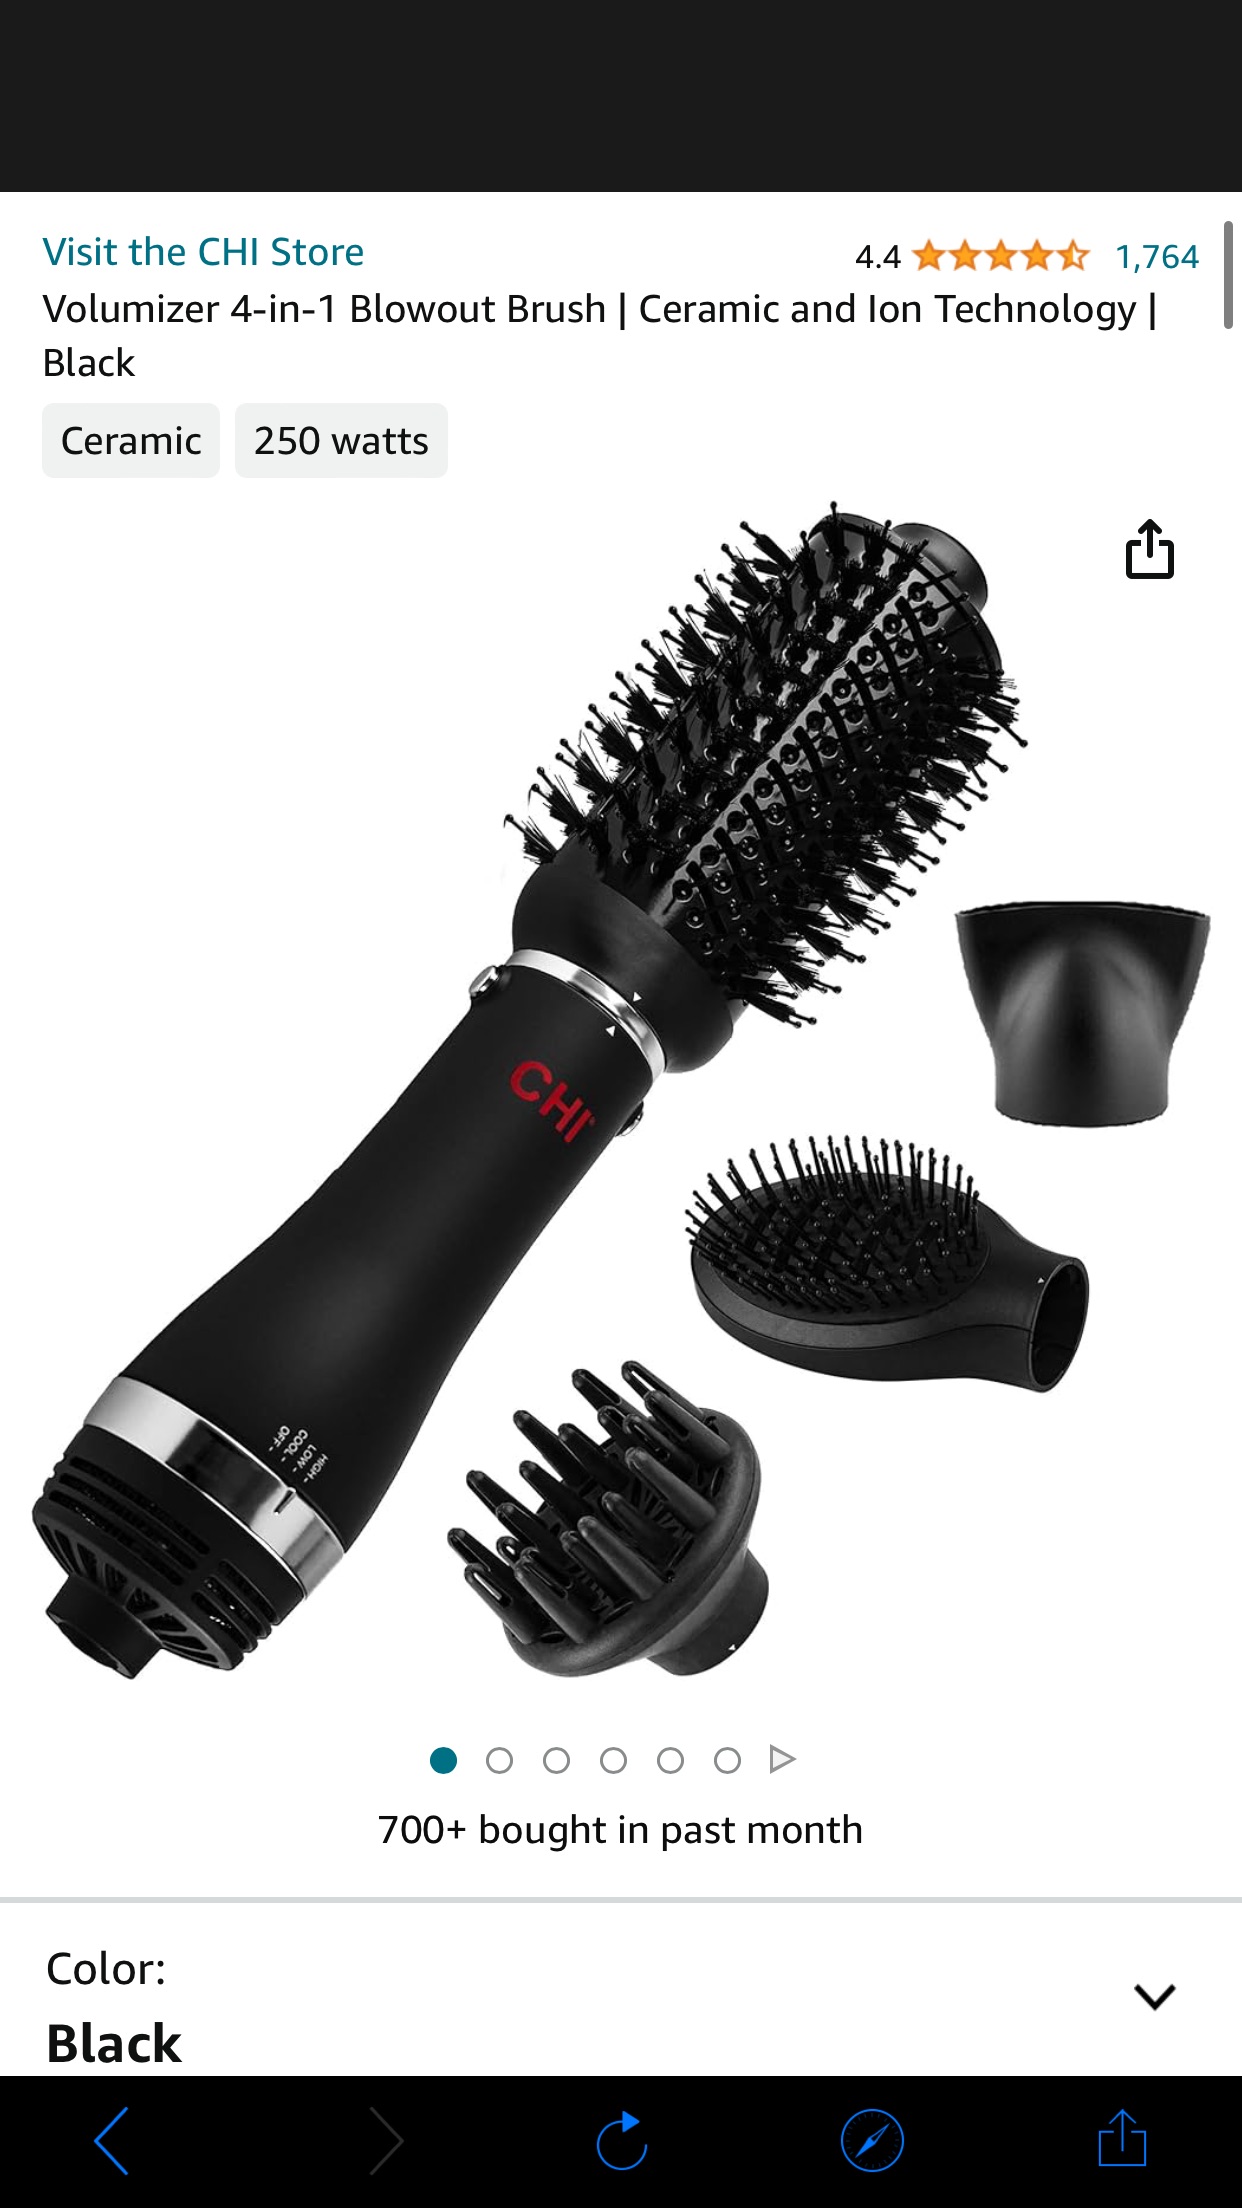 Amazon.com : CHI Volumizer 4-in-1 Blowout Brush | Ceramic and Ion Technology | Black